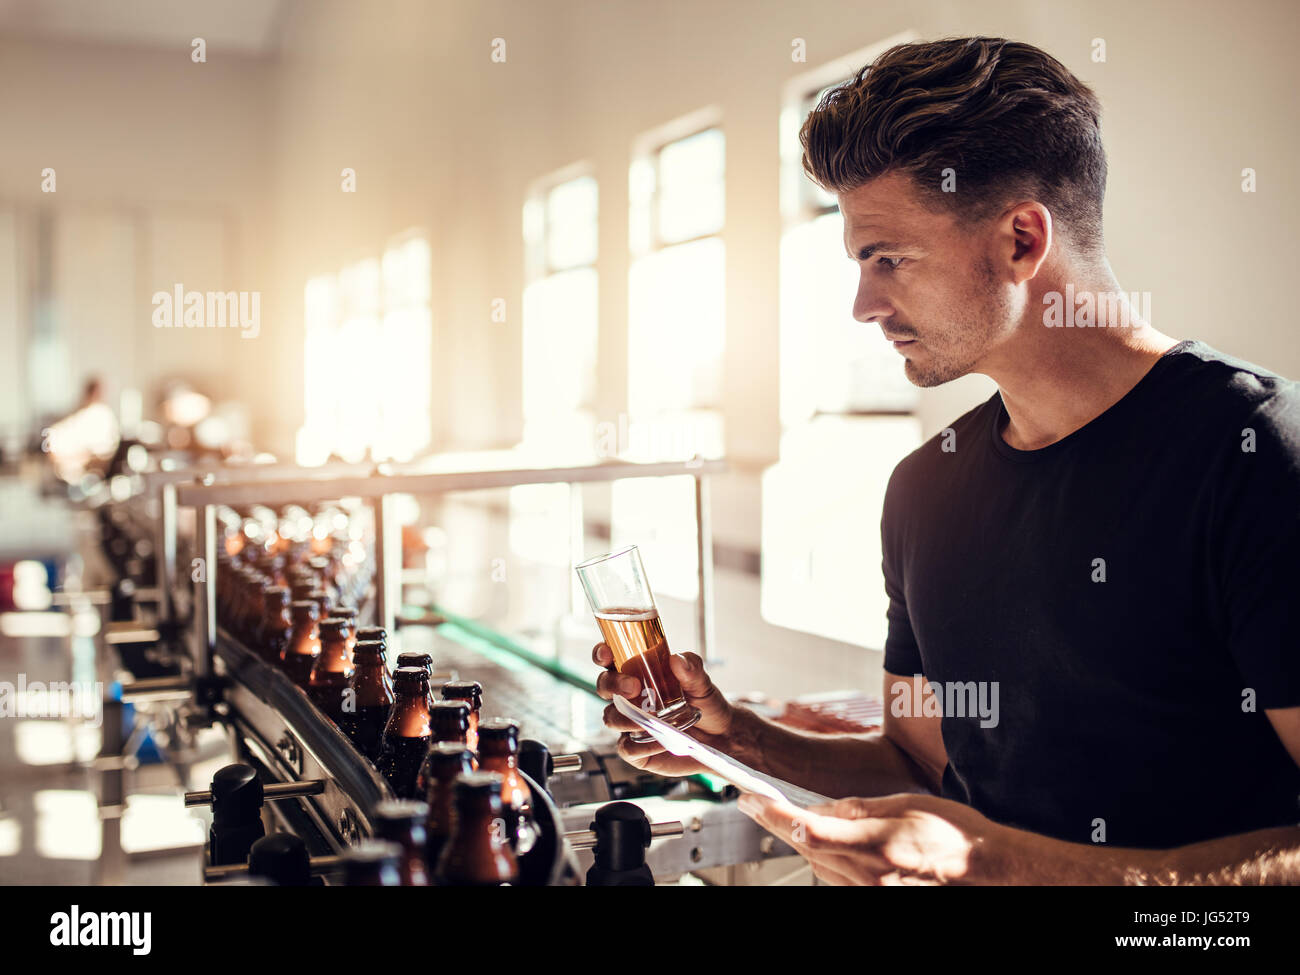 Young man examining the quality of beer at brewery. Male inspector working at alcohol manufacturing factory checking the craft beer. Stock Photo